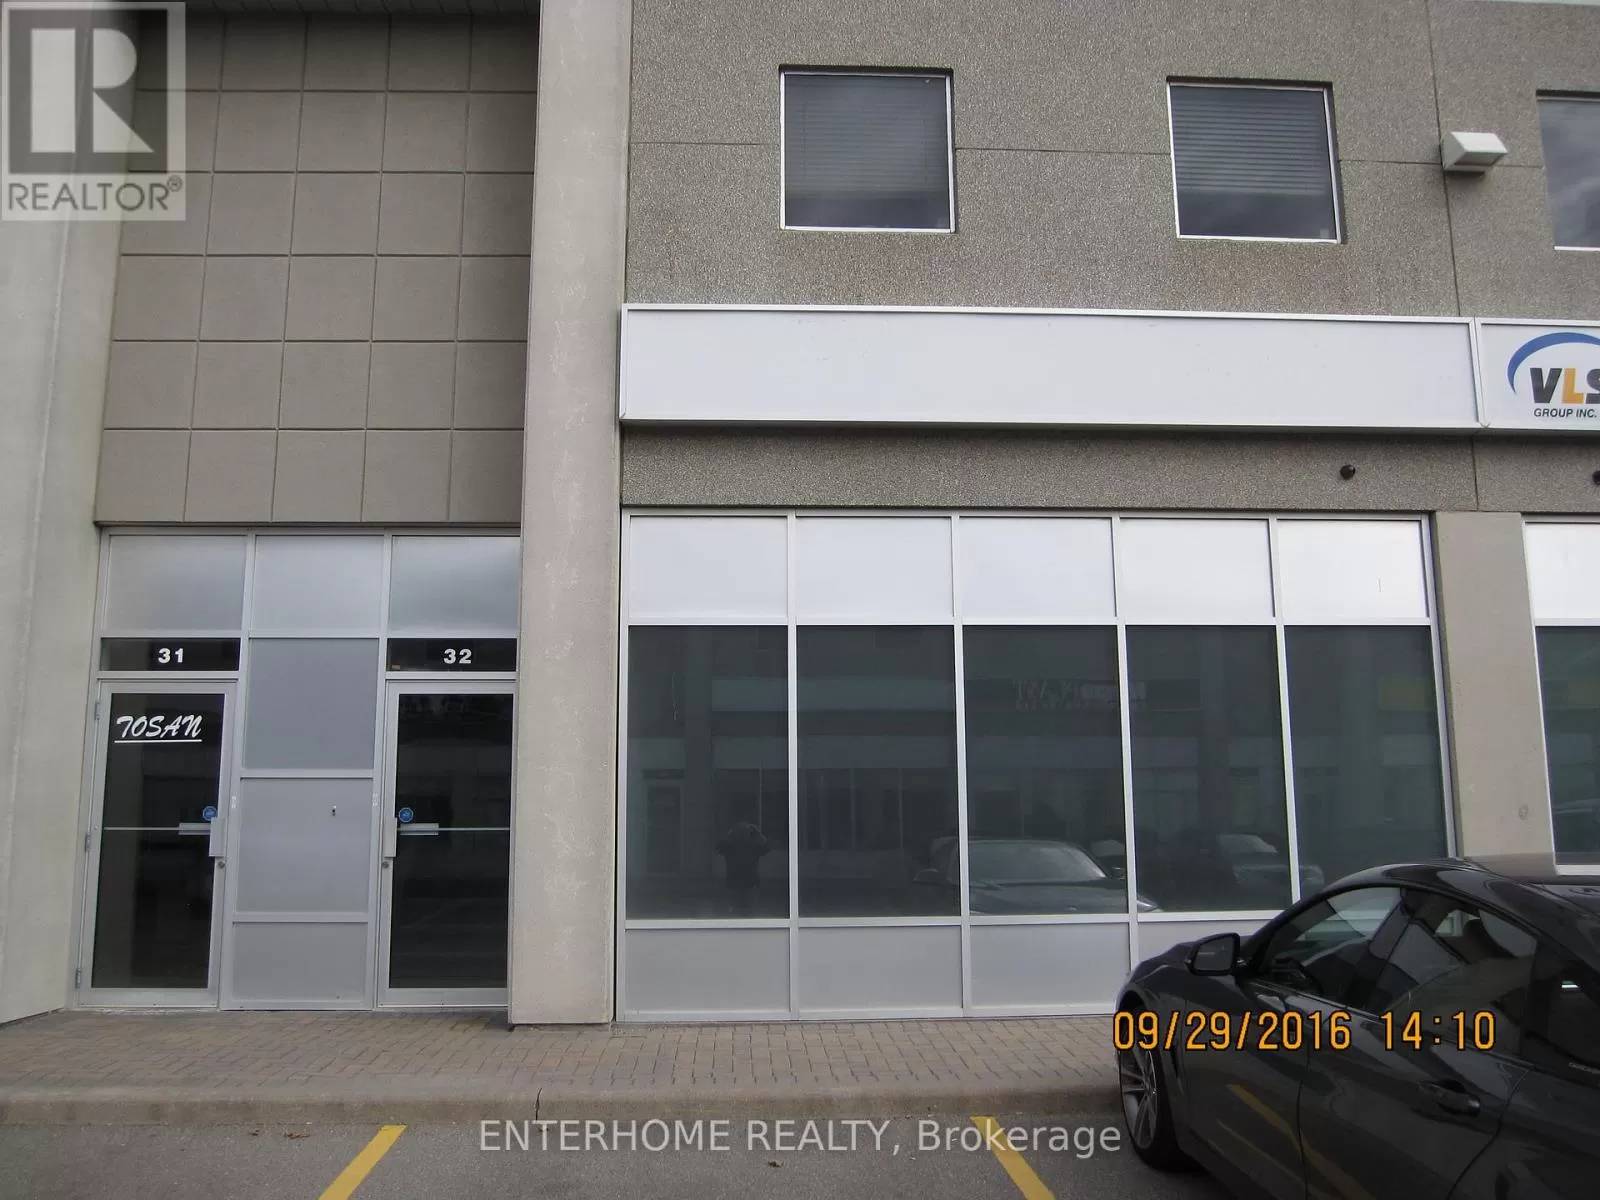 Offices for rent: 33 - 411 Four Valley Drive, Vaughan, Ontario L4K 5Y8